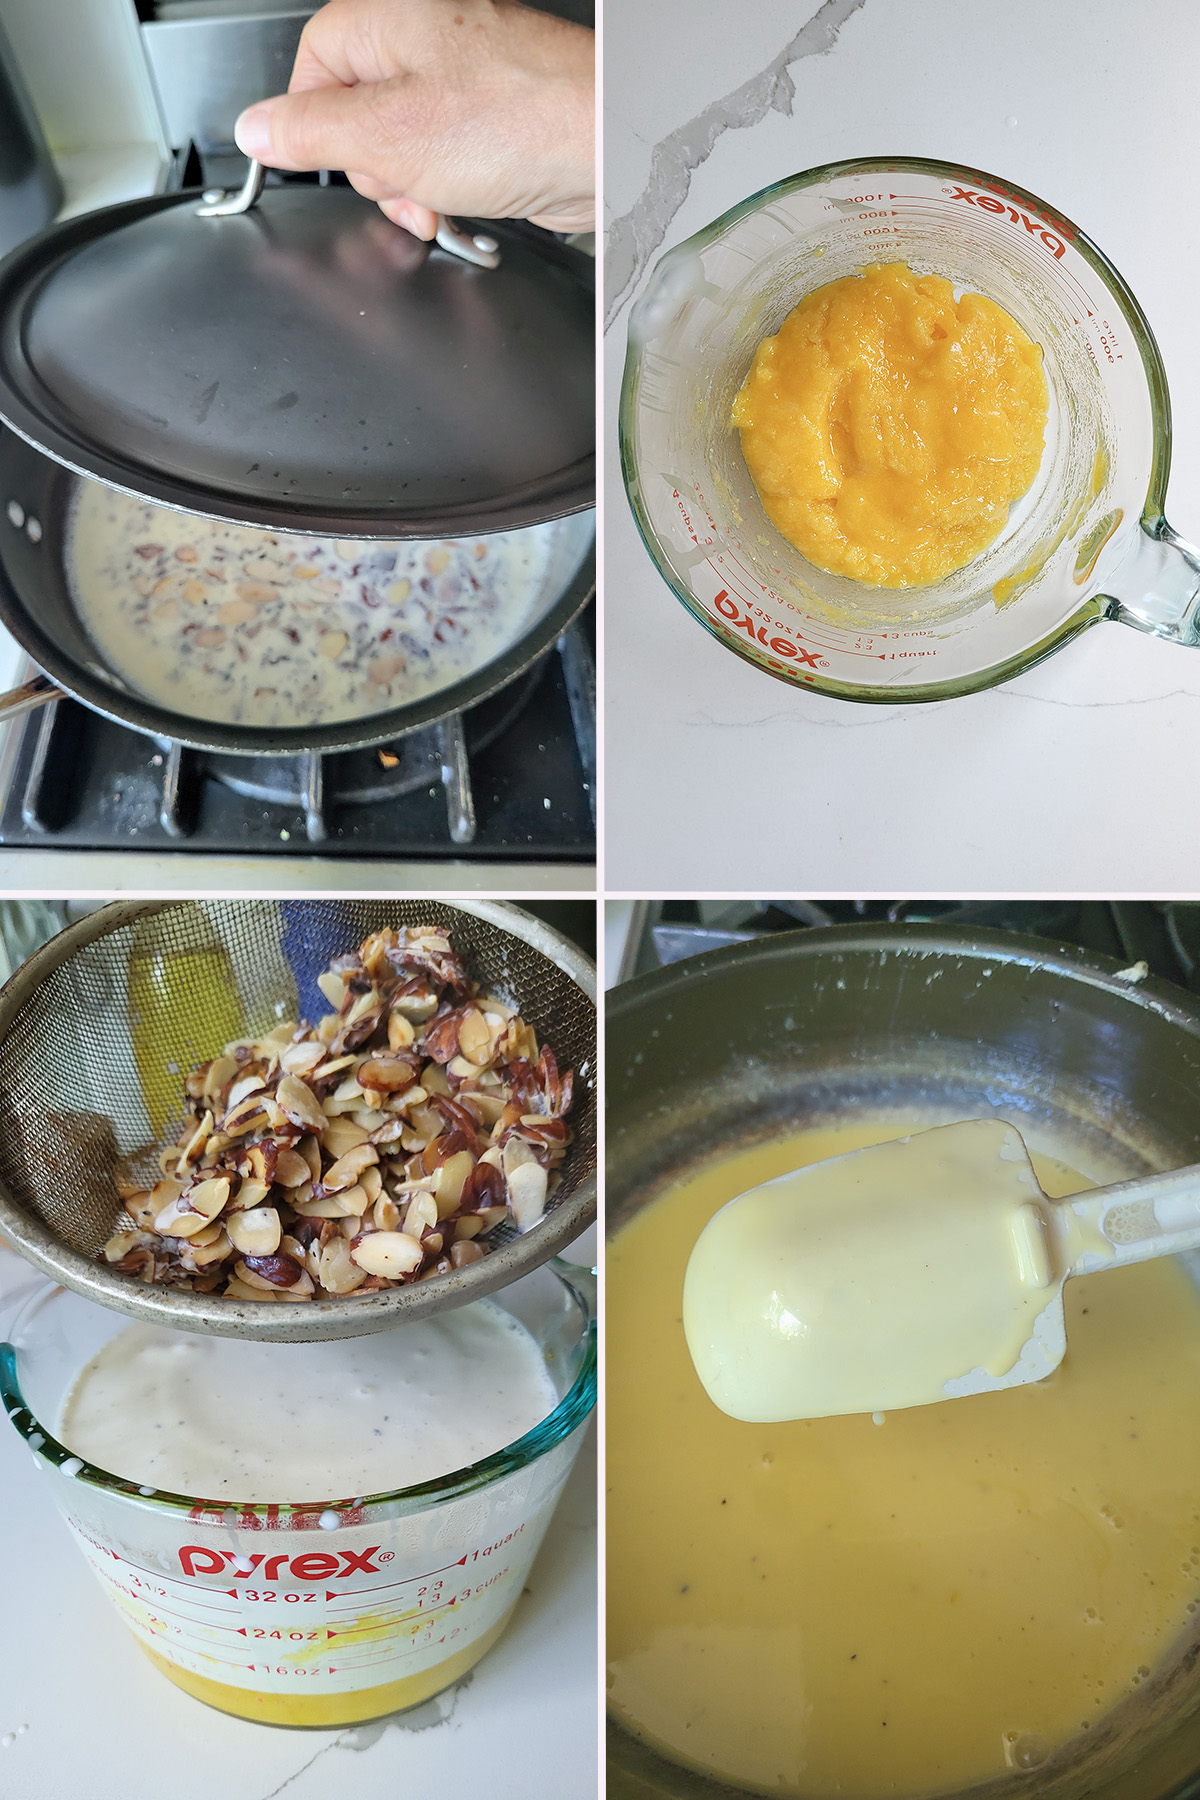 a pan with cream and almonds. a bowl of egg yolks. a pan of cooked custard.